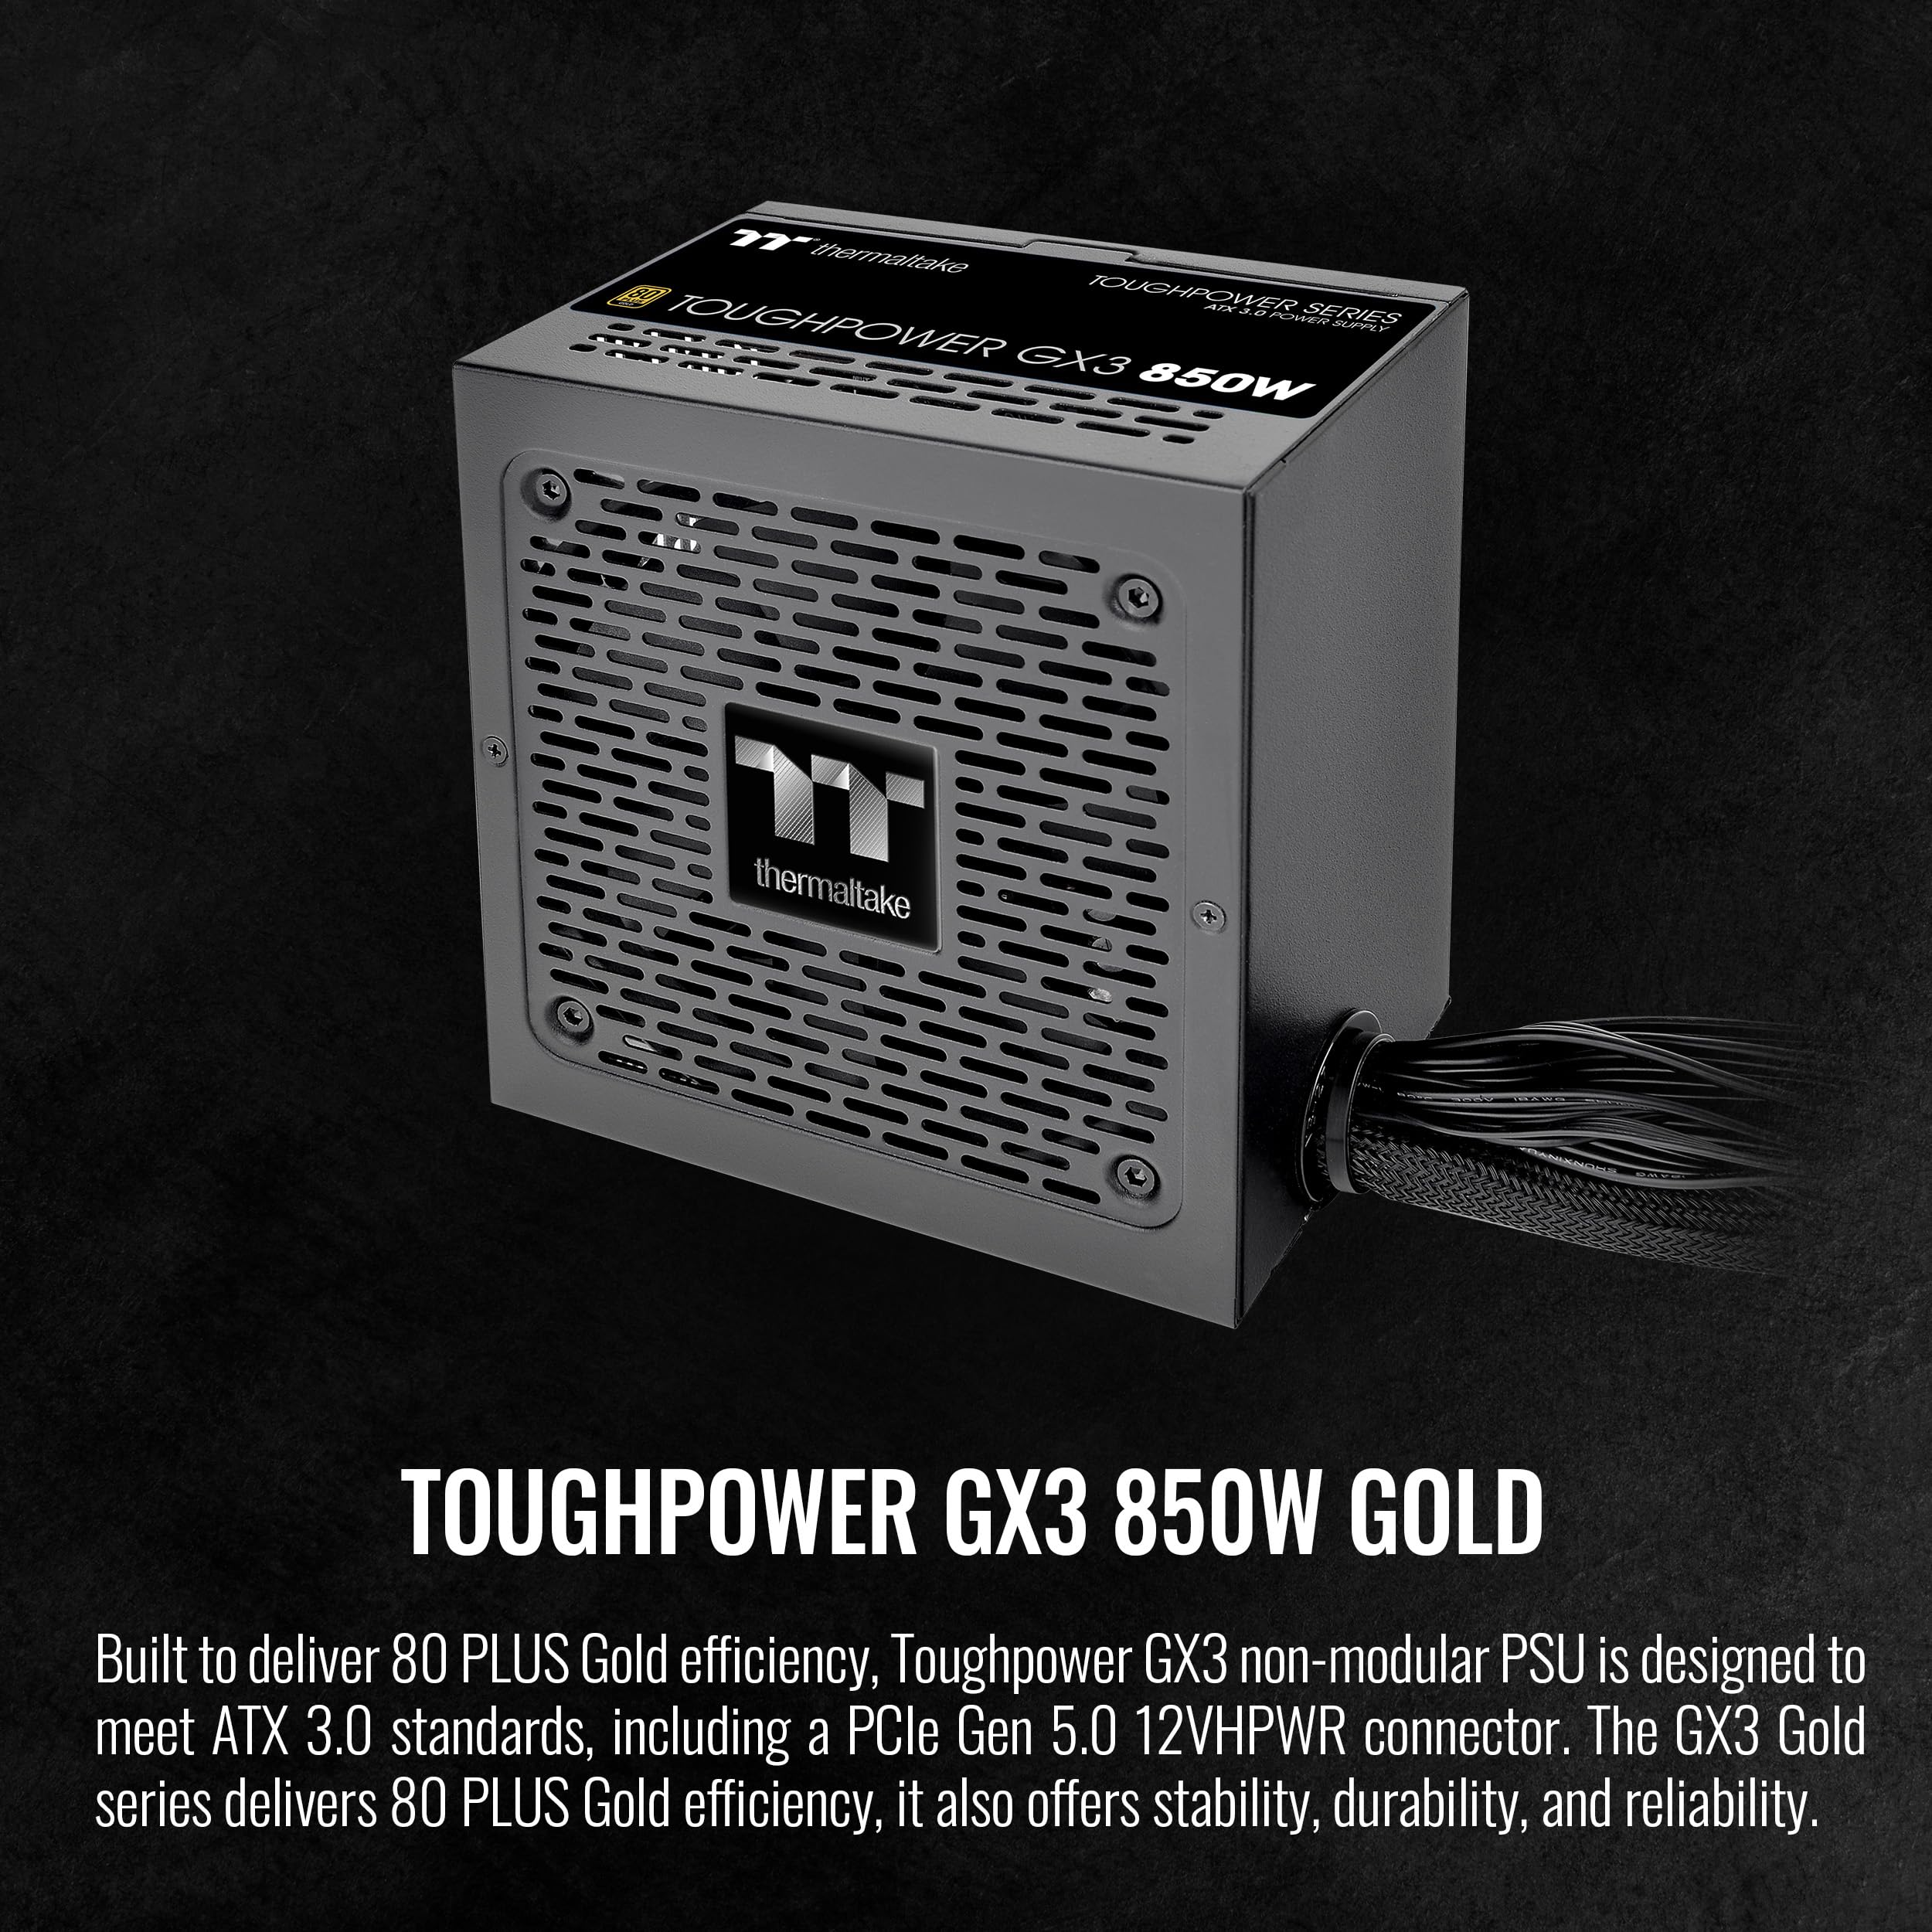 Thermaltake Toughpower GX3 850W 80Plus Gold SLI/Crossfire Ready ATX 3.0 Power Supply; PCIe5 12VHPWR Connector Included; 5 Year Warranty; PS-TPD-0850NNFAGU-3